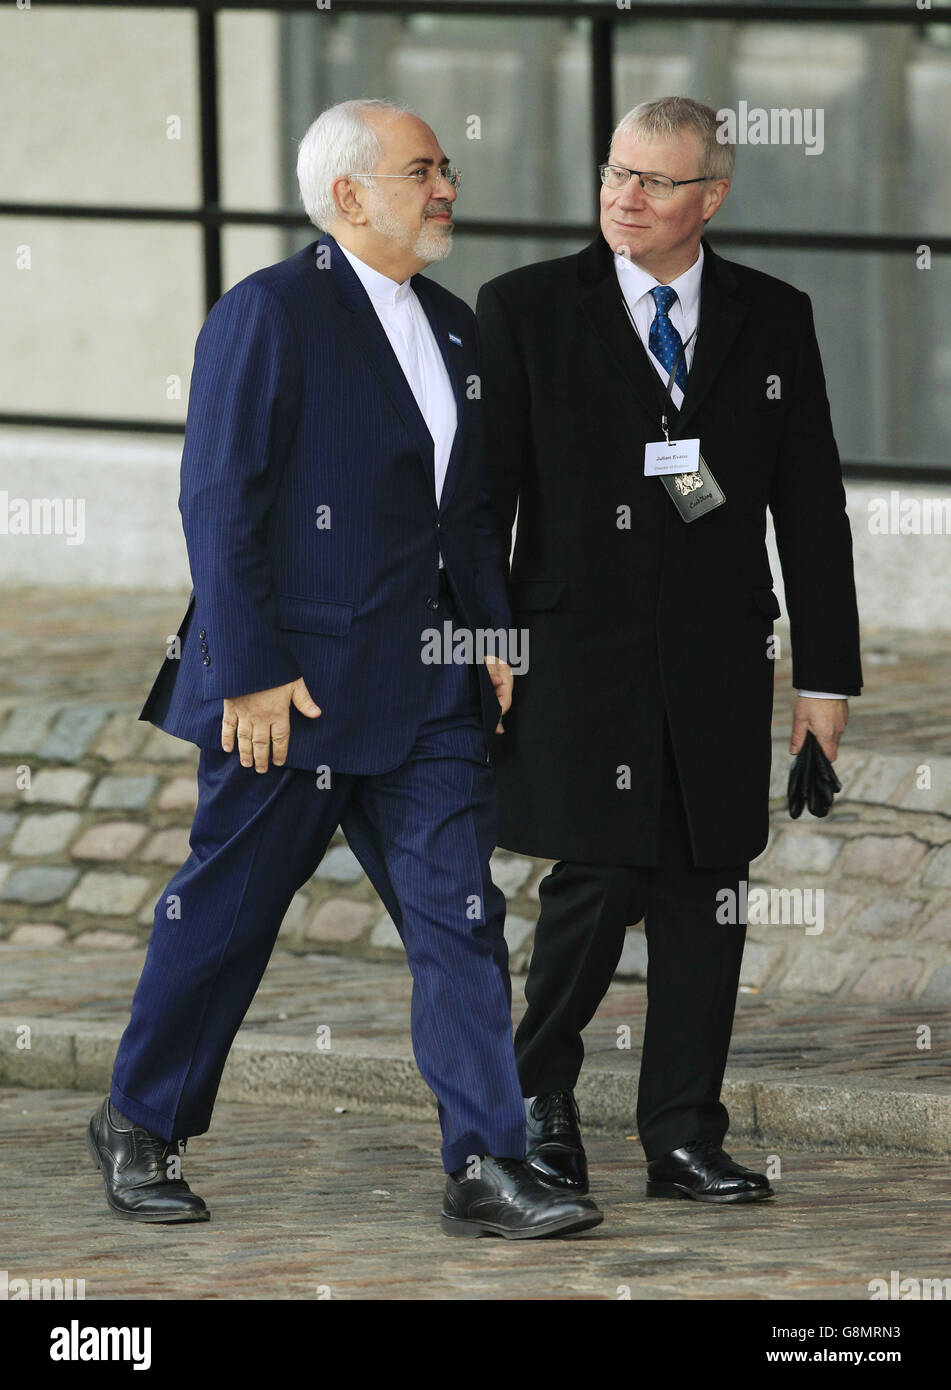 Iranian Foreign Minister Mohammad Javad Zarif (left) is welcomed by Julian Evans, Director of Protocol at the Foreign and Commonwealth Office, as he arrives at the Queen Elizabeth II Conference Centre in London where world leaders are gathering for talks over the Syrian refugee crisis. Stock Photo